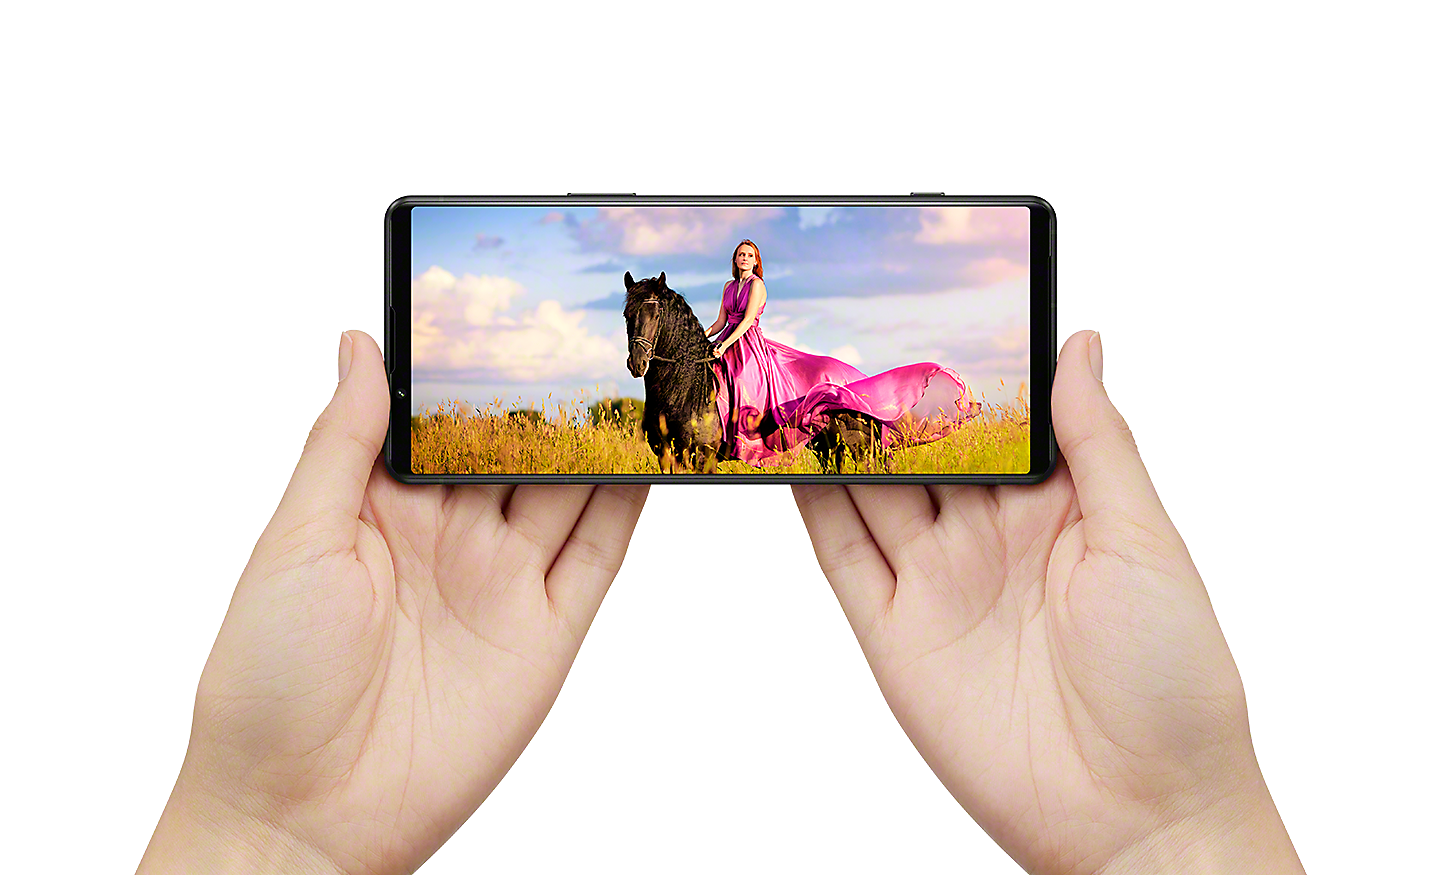 Hands holding an Xperia 5 IV in landscape position displaying a cinematic image of a woman on horseback